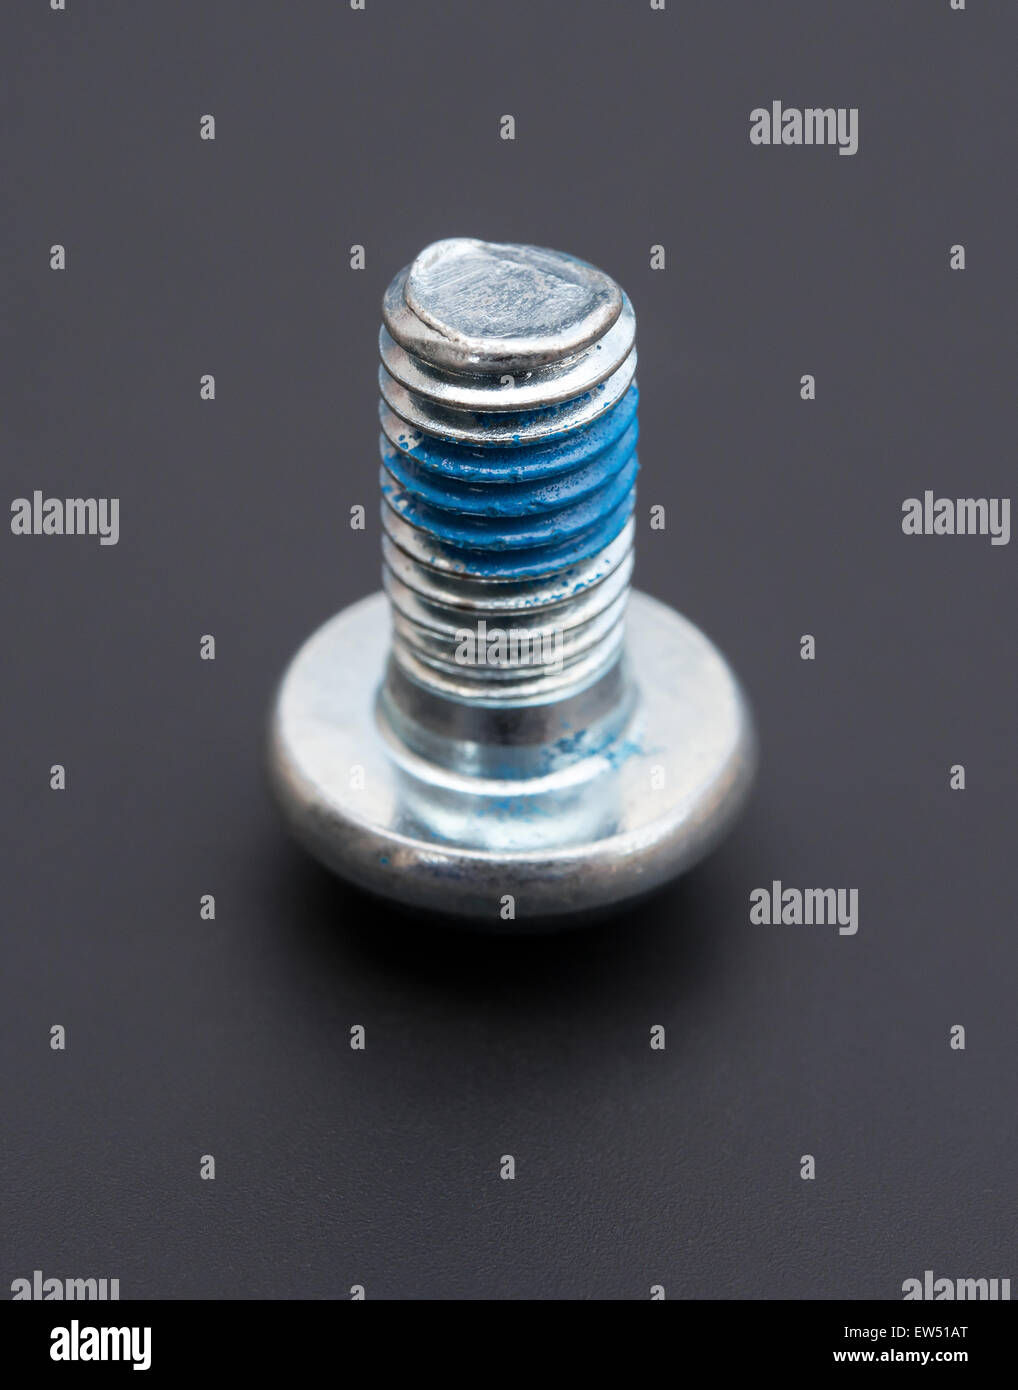 round head bolt with blue glue on a black background Stock Photo